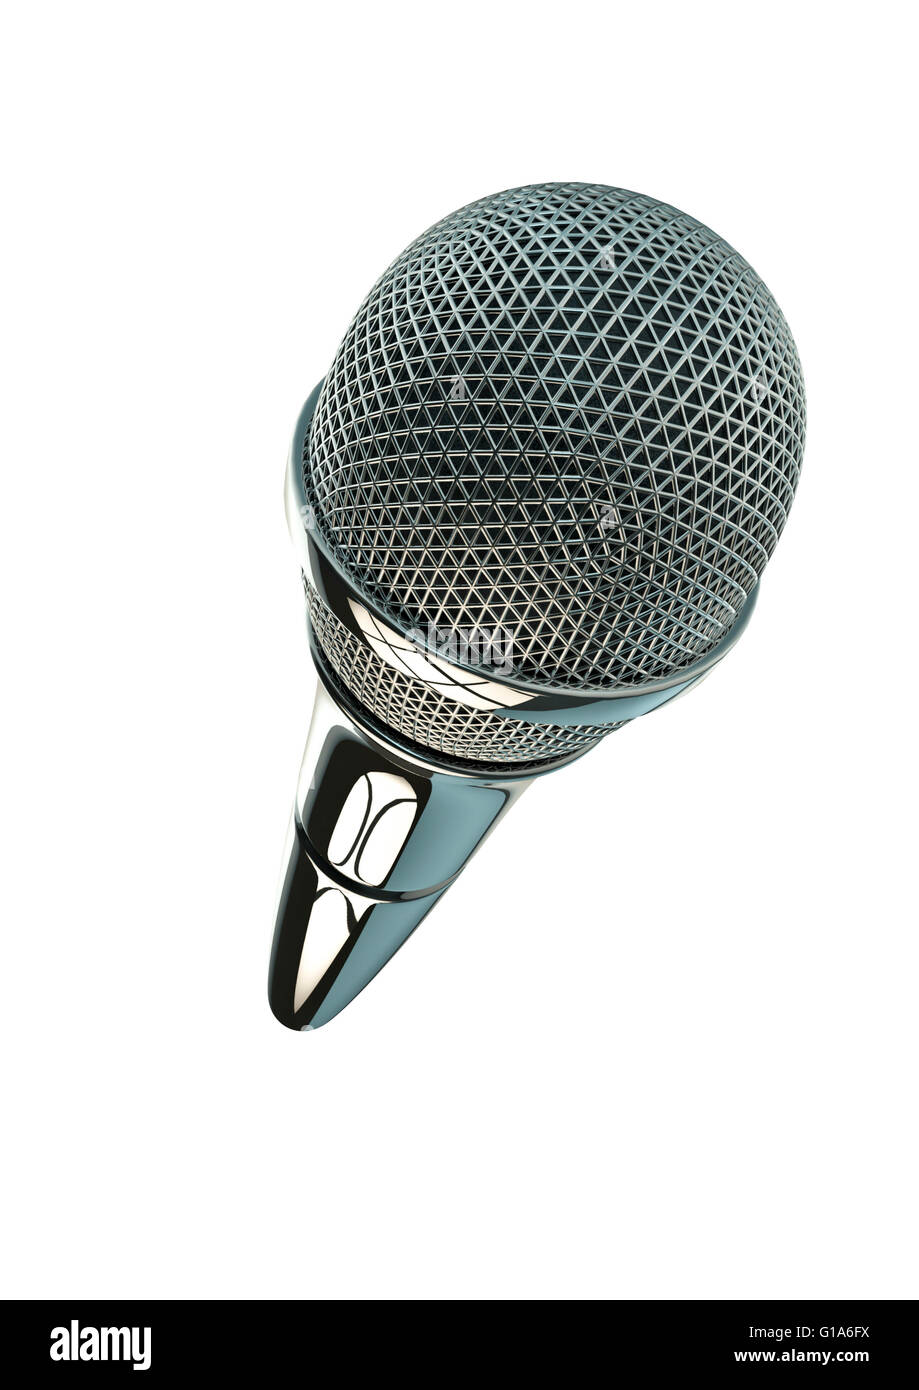 Microphone singer / 3D render of microphone Stock Photo